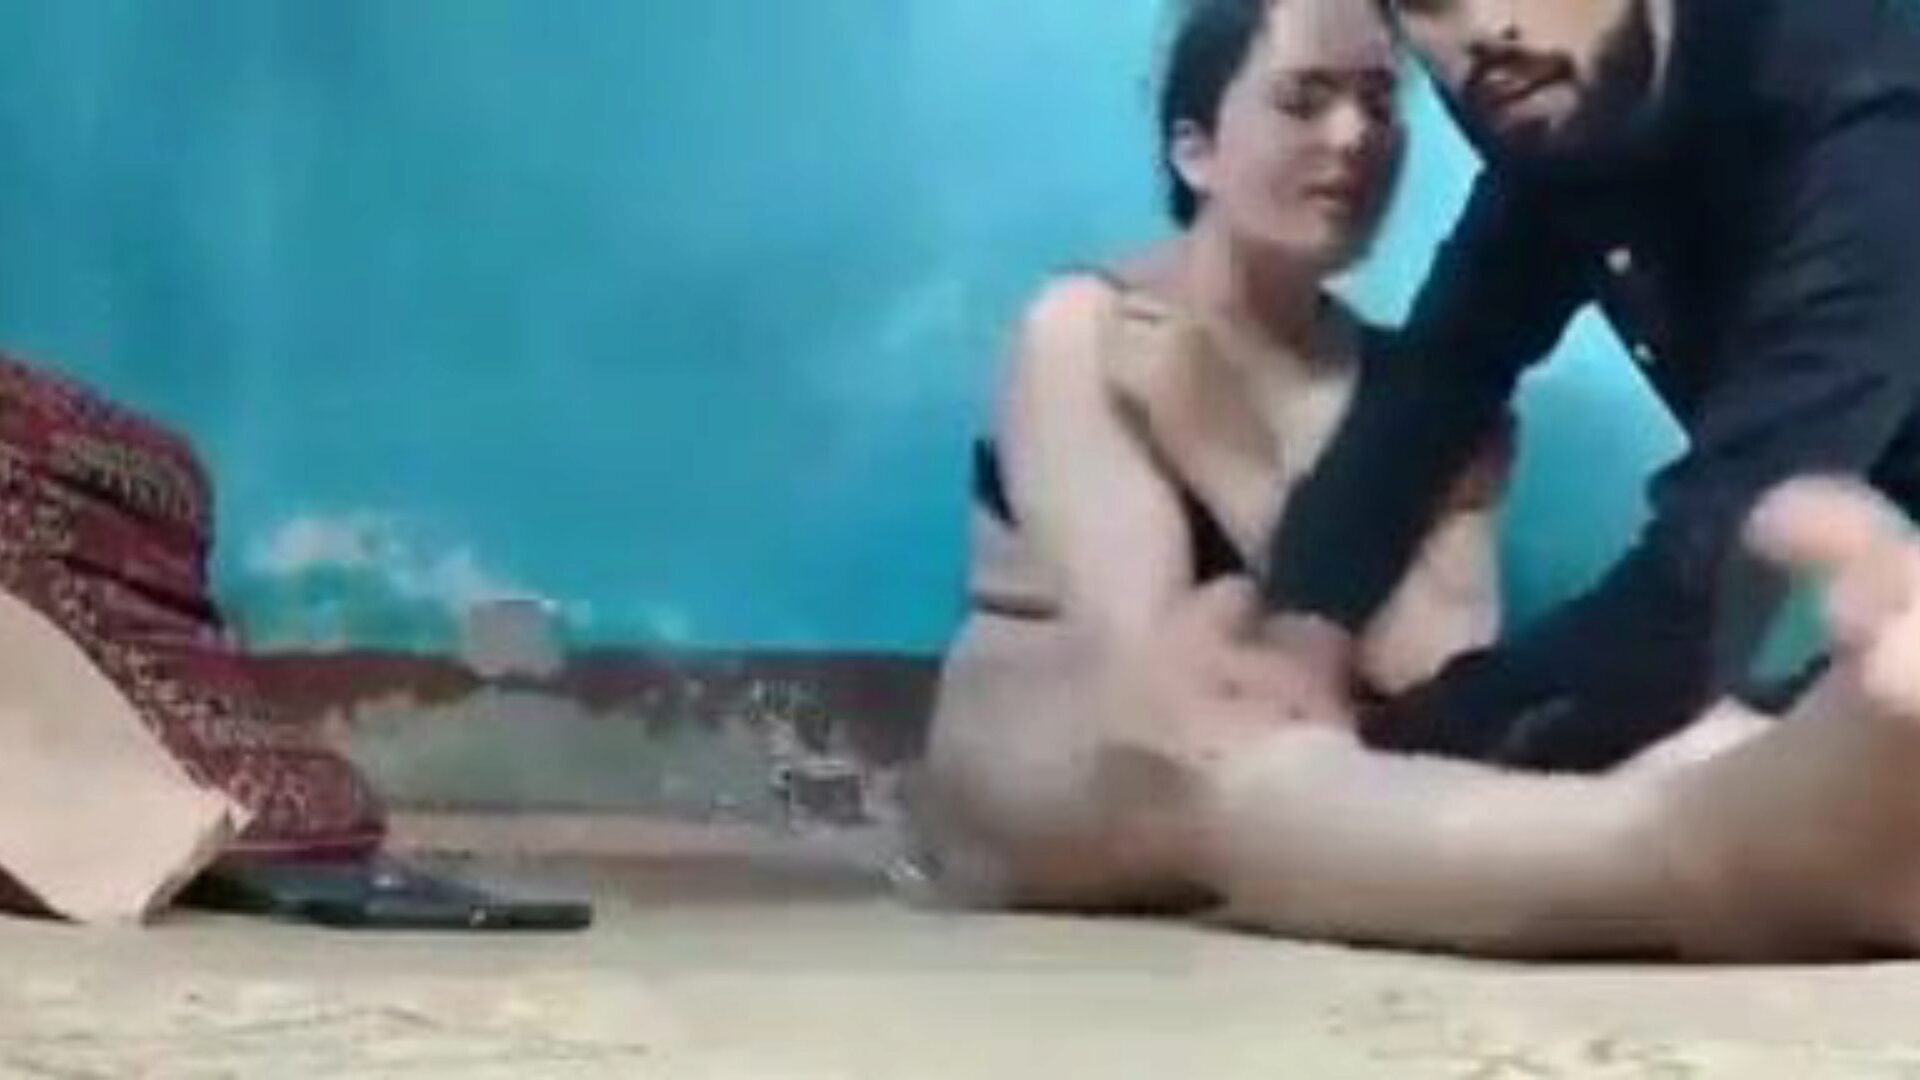 Kashmiri Sex Video: Free Indian Porn Video 69 - xHamster Watch Kashmiri Sex Video tube bang-out video for free on xHamster, with the sexiest collection of Indian Xxx Free Sex & Story porn episode scenes